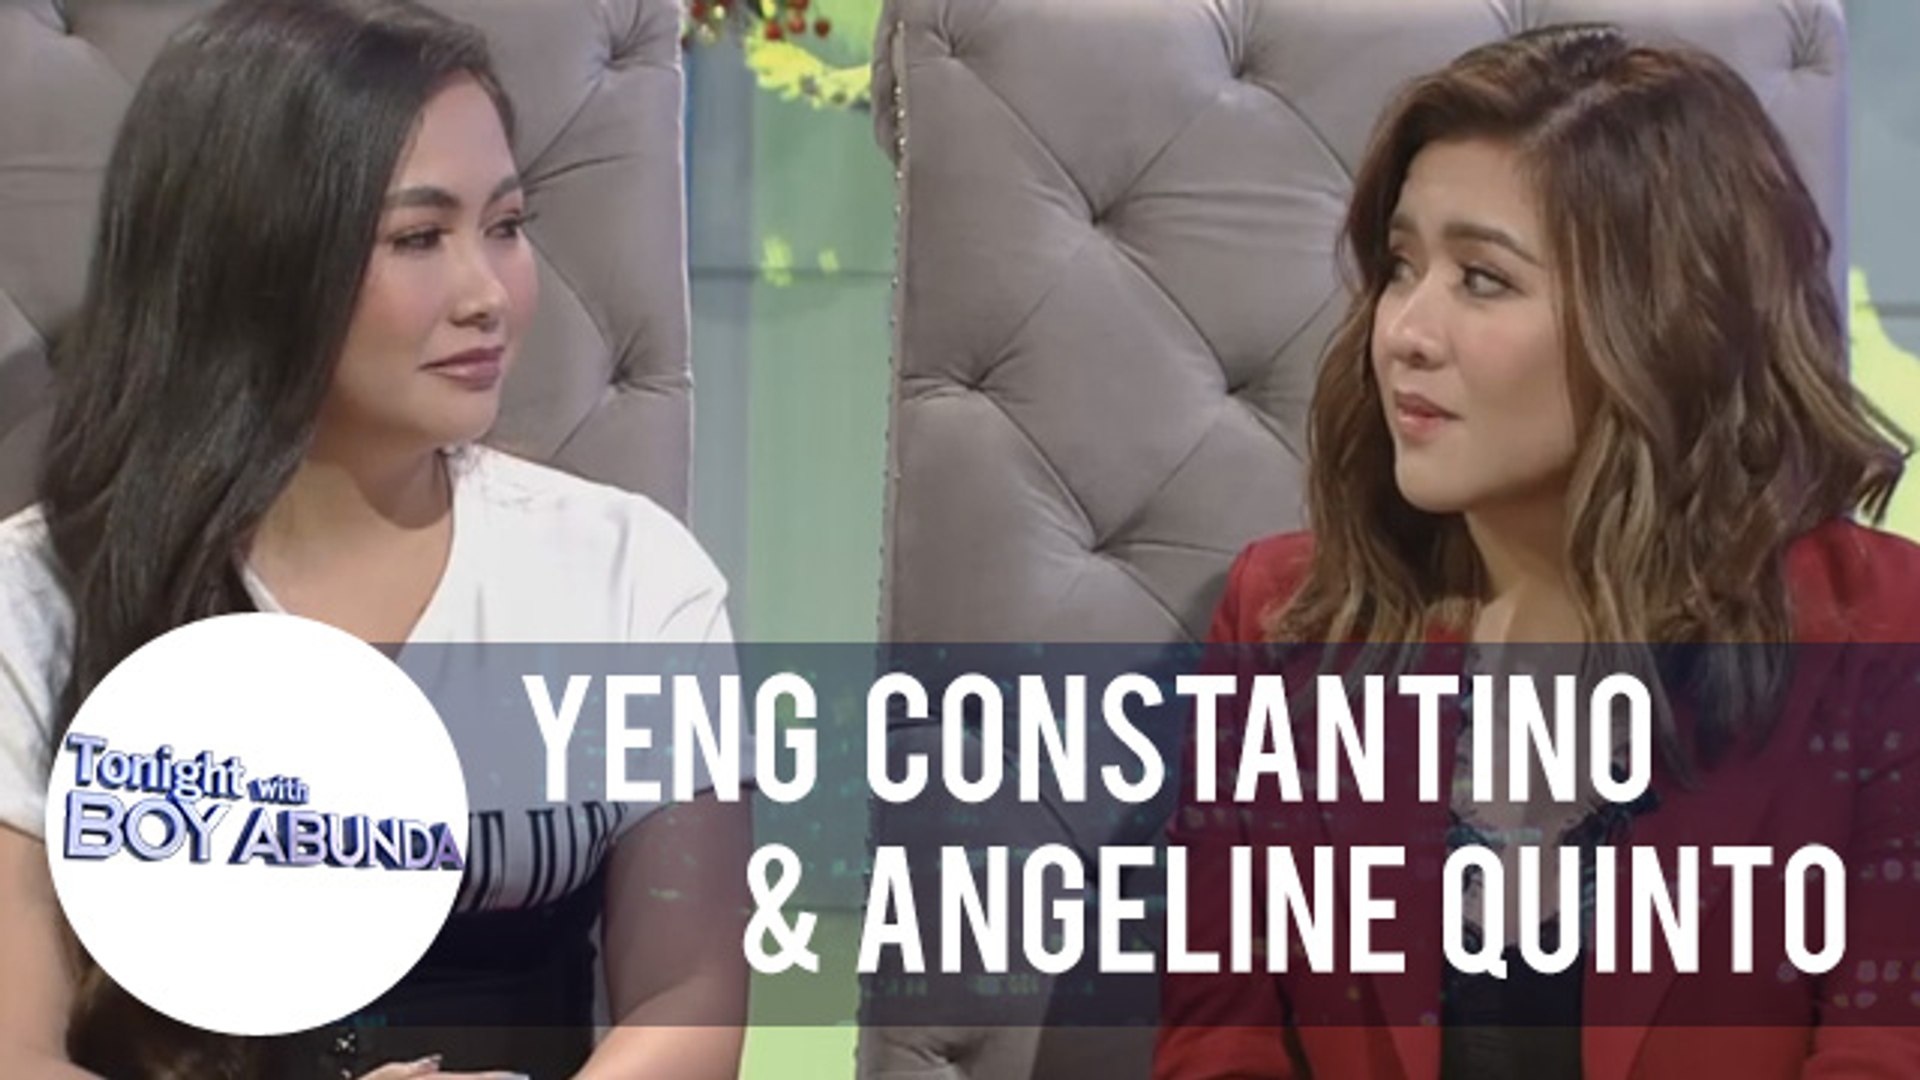 TWBA: Does Yeng Constantino and Angeline Quinto believe in each other's talent?